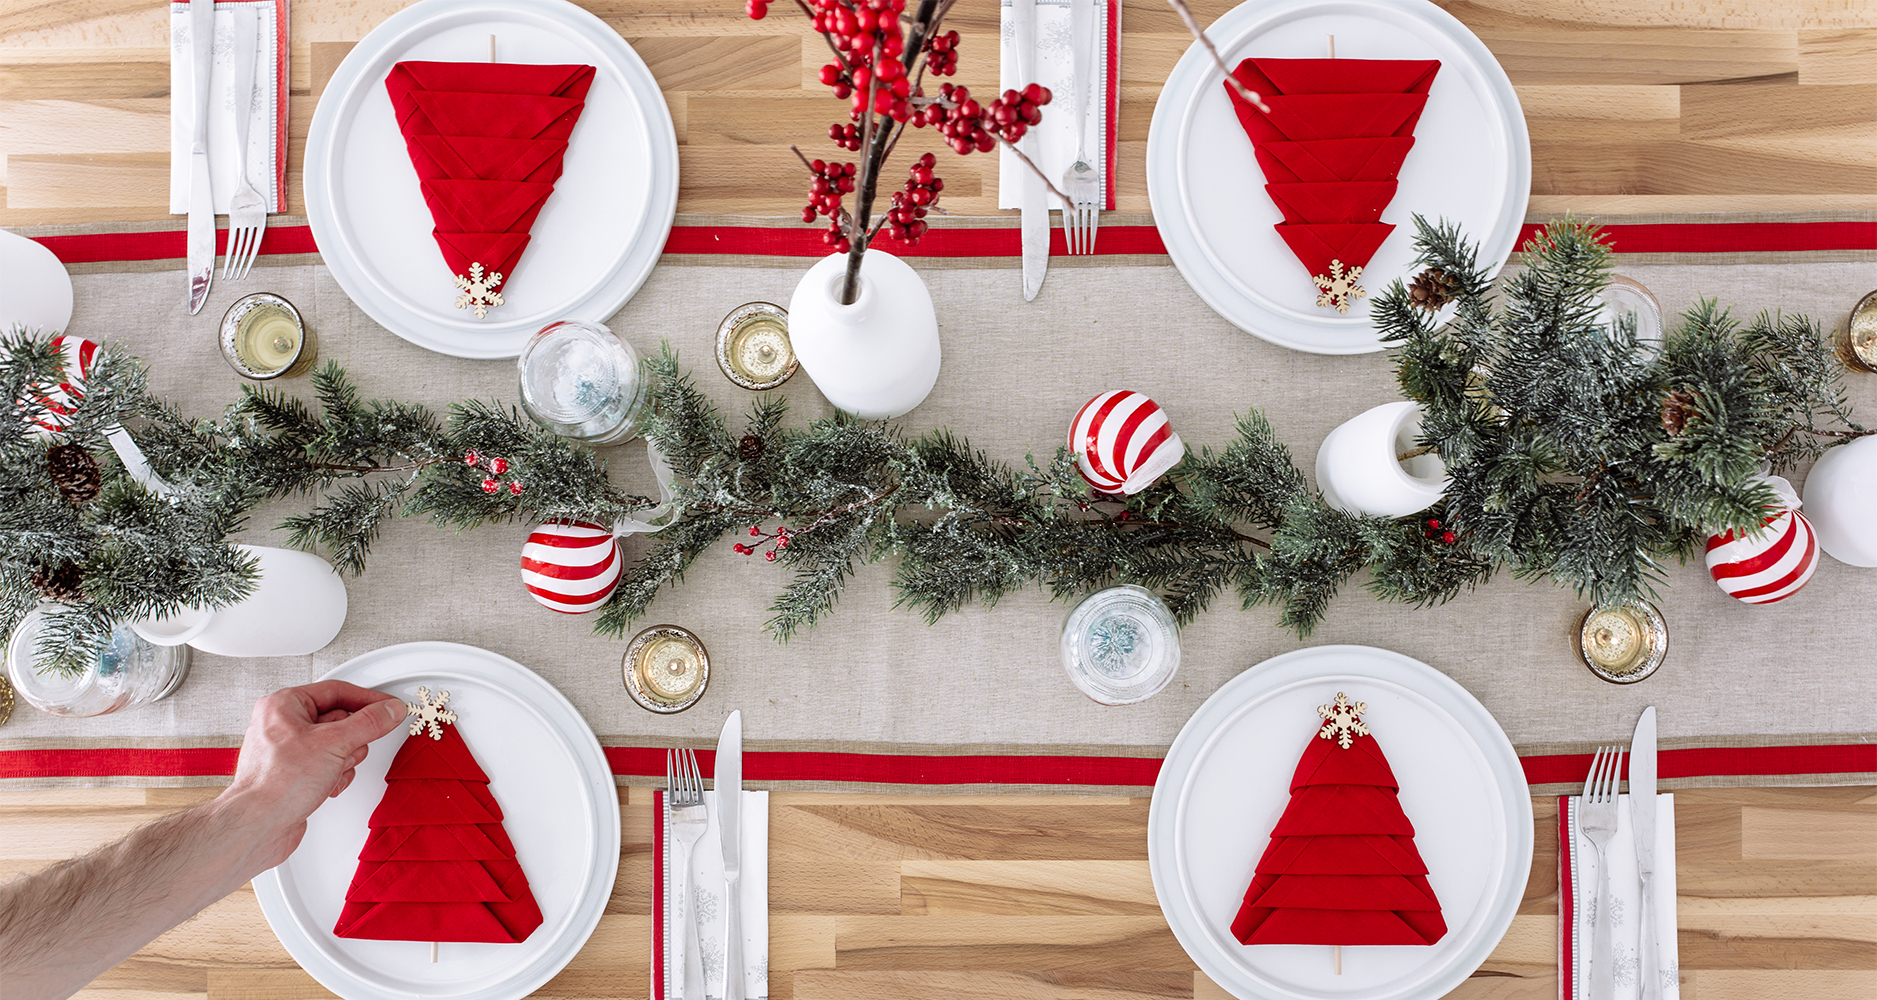 walmart-tips-tricks-holiday-party-on-budget-6